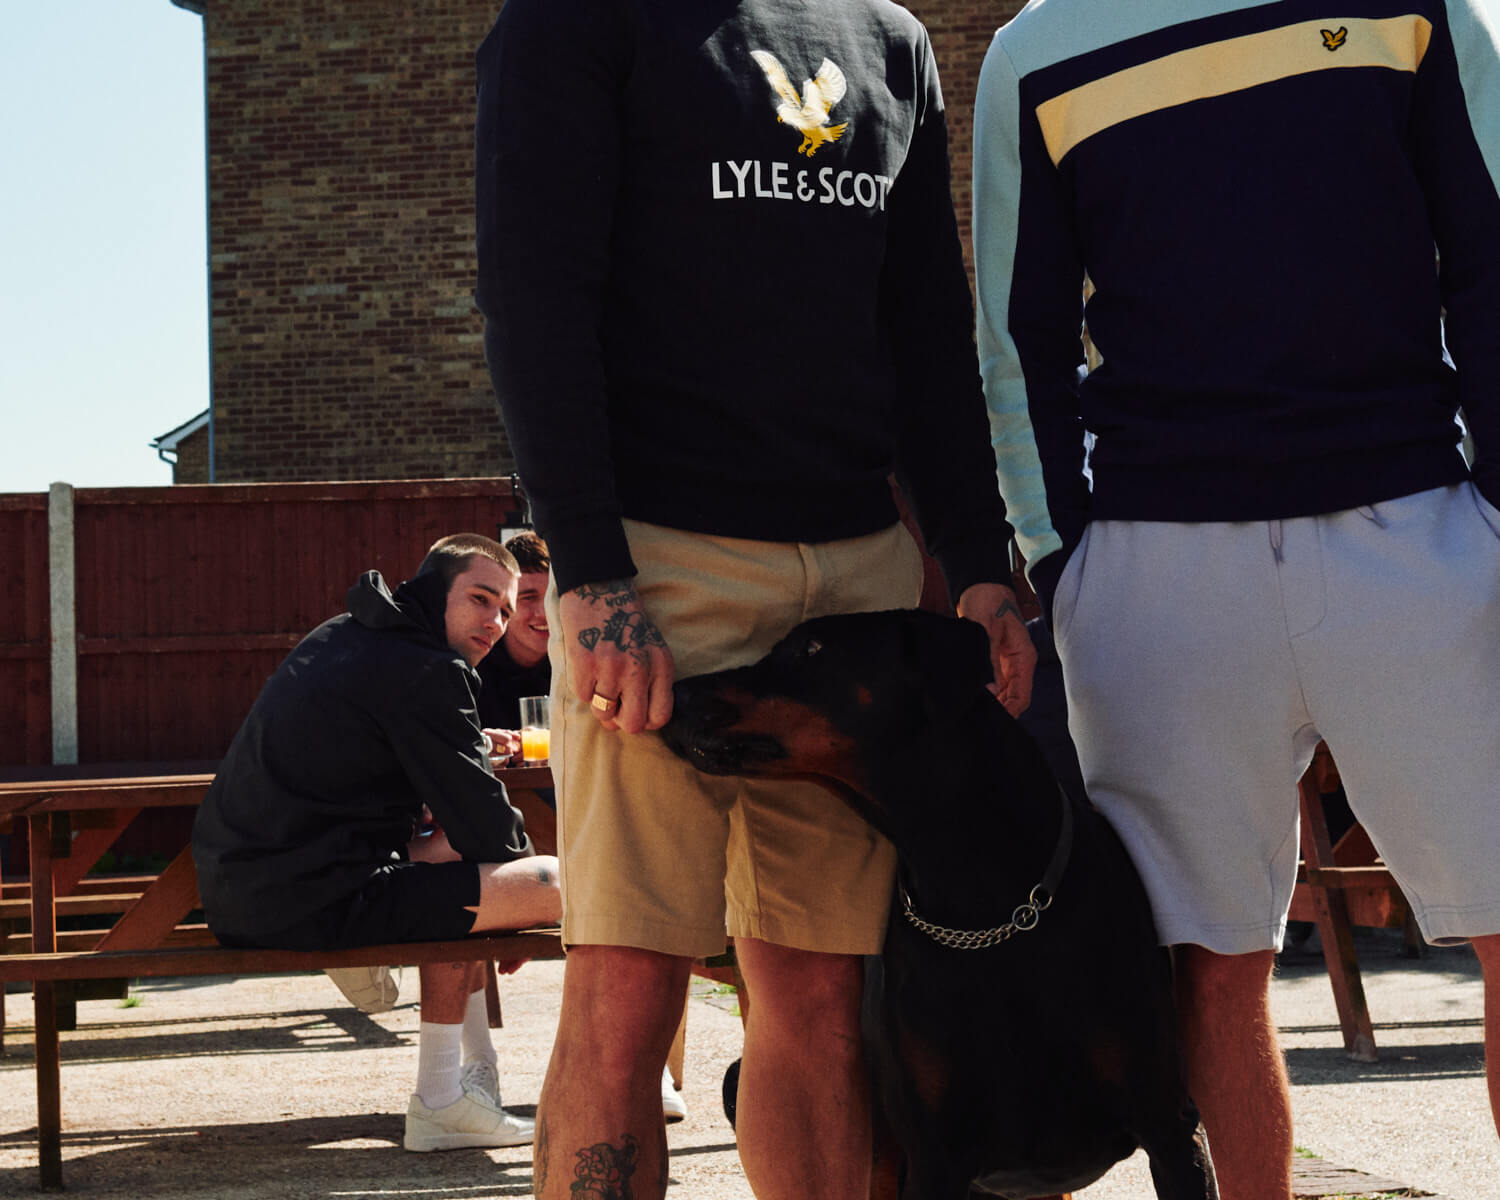 Two lads with dog in BexleyHeath pub beer garden, 